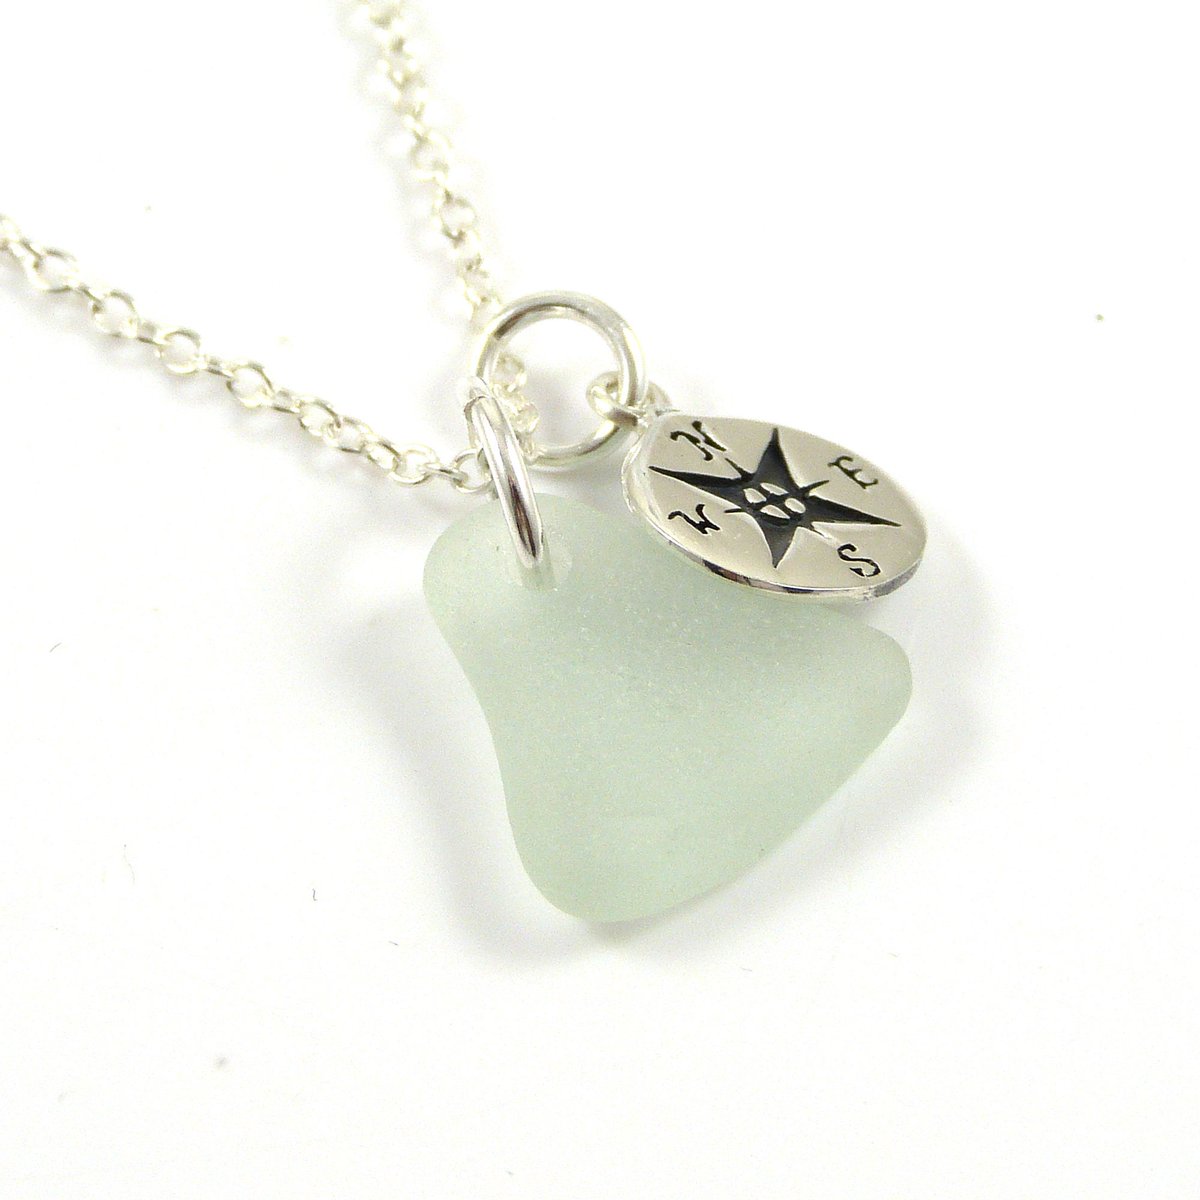 Light Teal Sea Glass, Sterling Silver Compass Charm Necklace, Gift Boxed - Ready to Ship tuppu.net/950dd448 #UKGiftHour #womaninbizhour #EarlyBiz #shopindie #HandmadeHour #craftbizparty #thestrandline #elevenseshour #MHHSBD #UKGiftAM